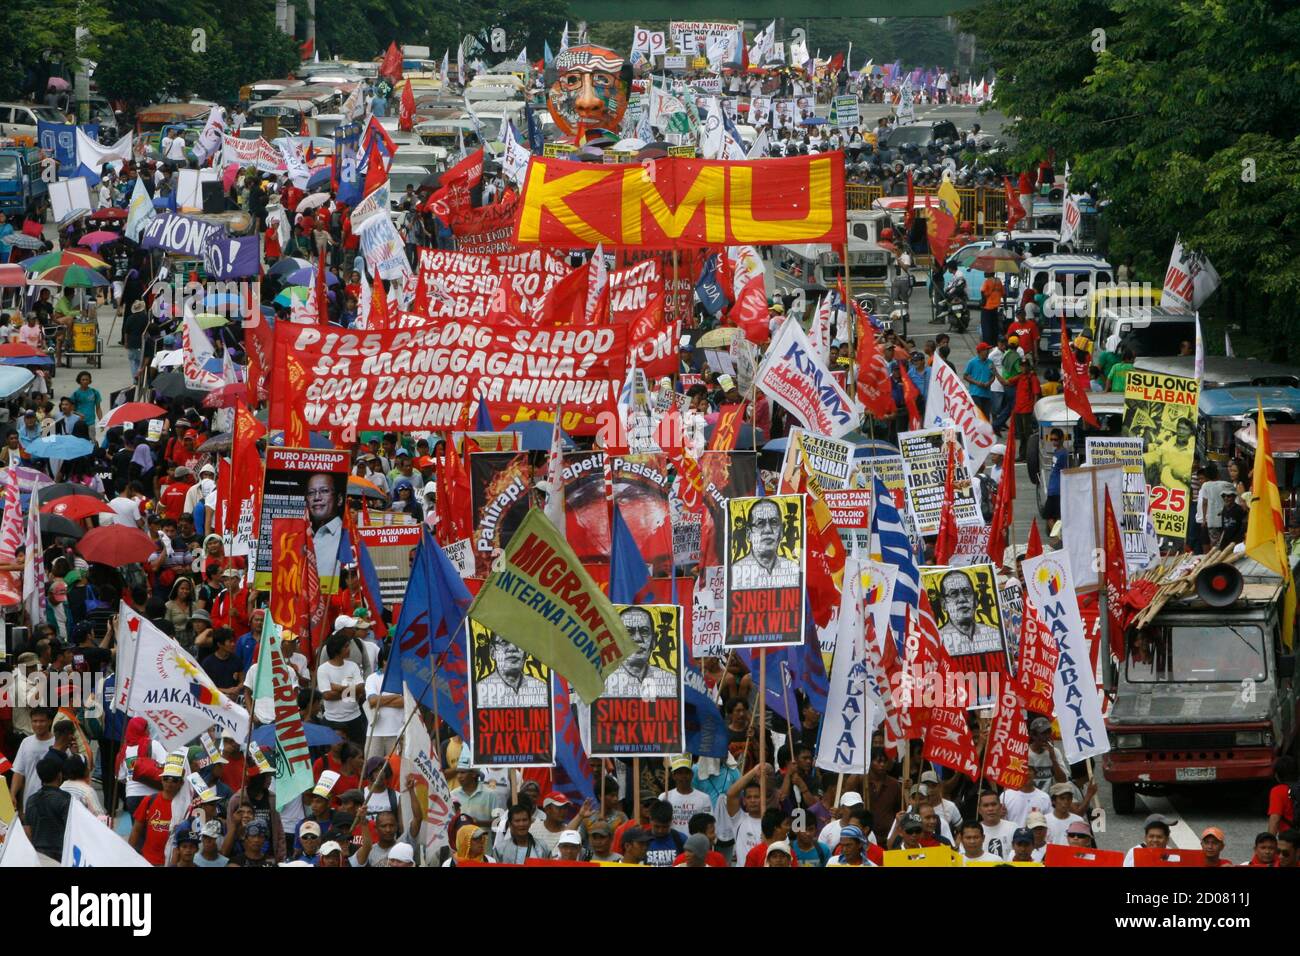 Protesters carry banners and placards as they march along a busy street  during a rally outside the Batasan Complex in Quezon city, metro Manila  July 23, 2012, where Philippines President Benigno Aquino